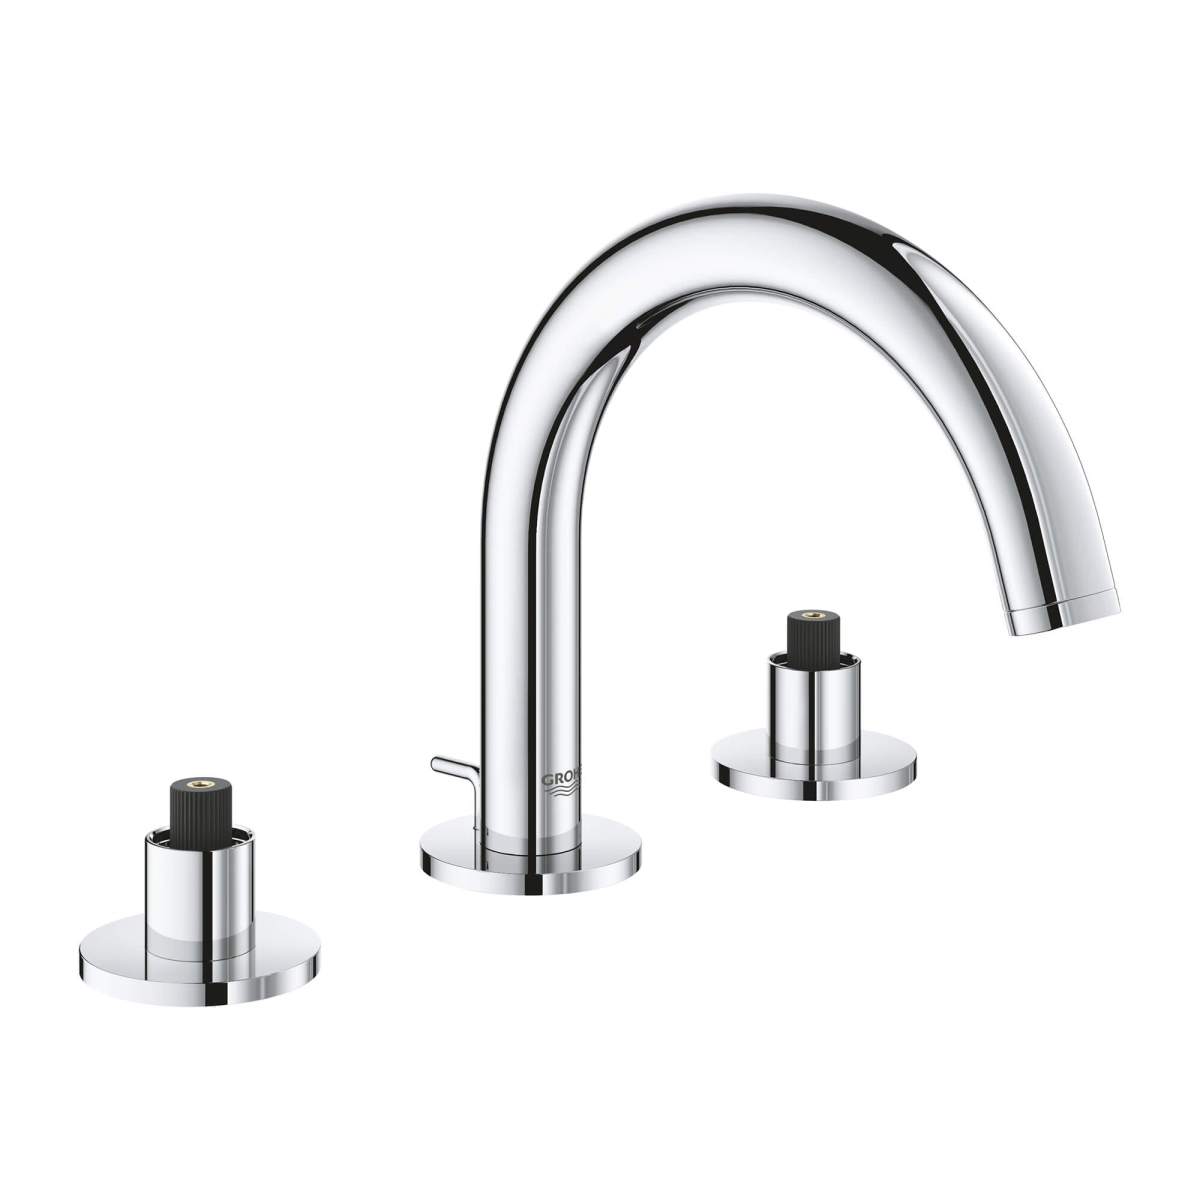 GROHE AMERICA, INC Grohe 20072003 8 in. 1.2 GPM Widespread 2-Handle Bathroom Faucet, Chrome - Medium